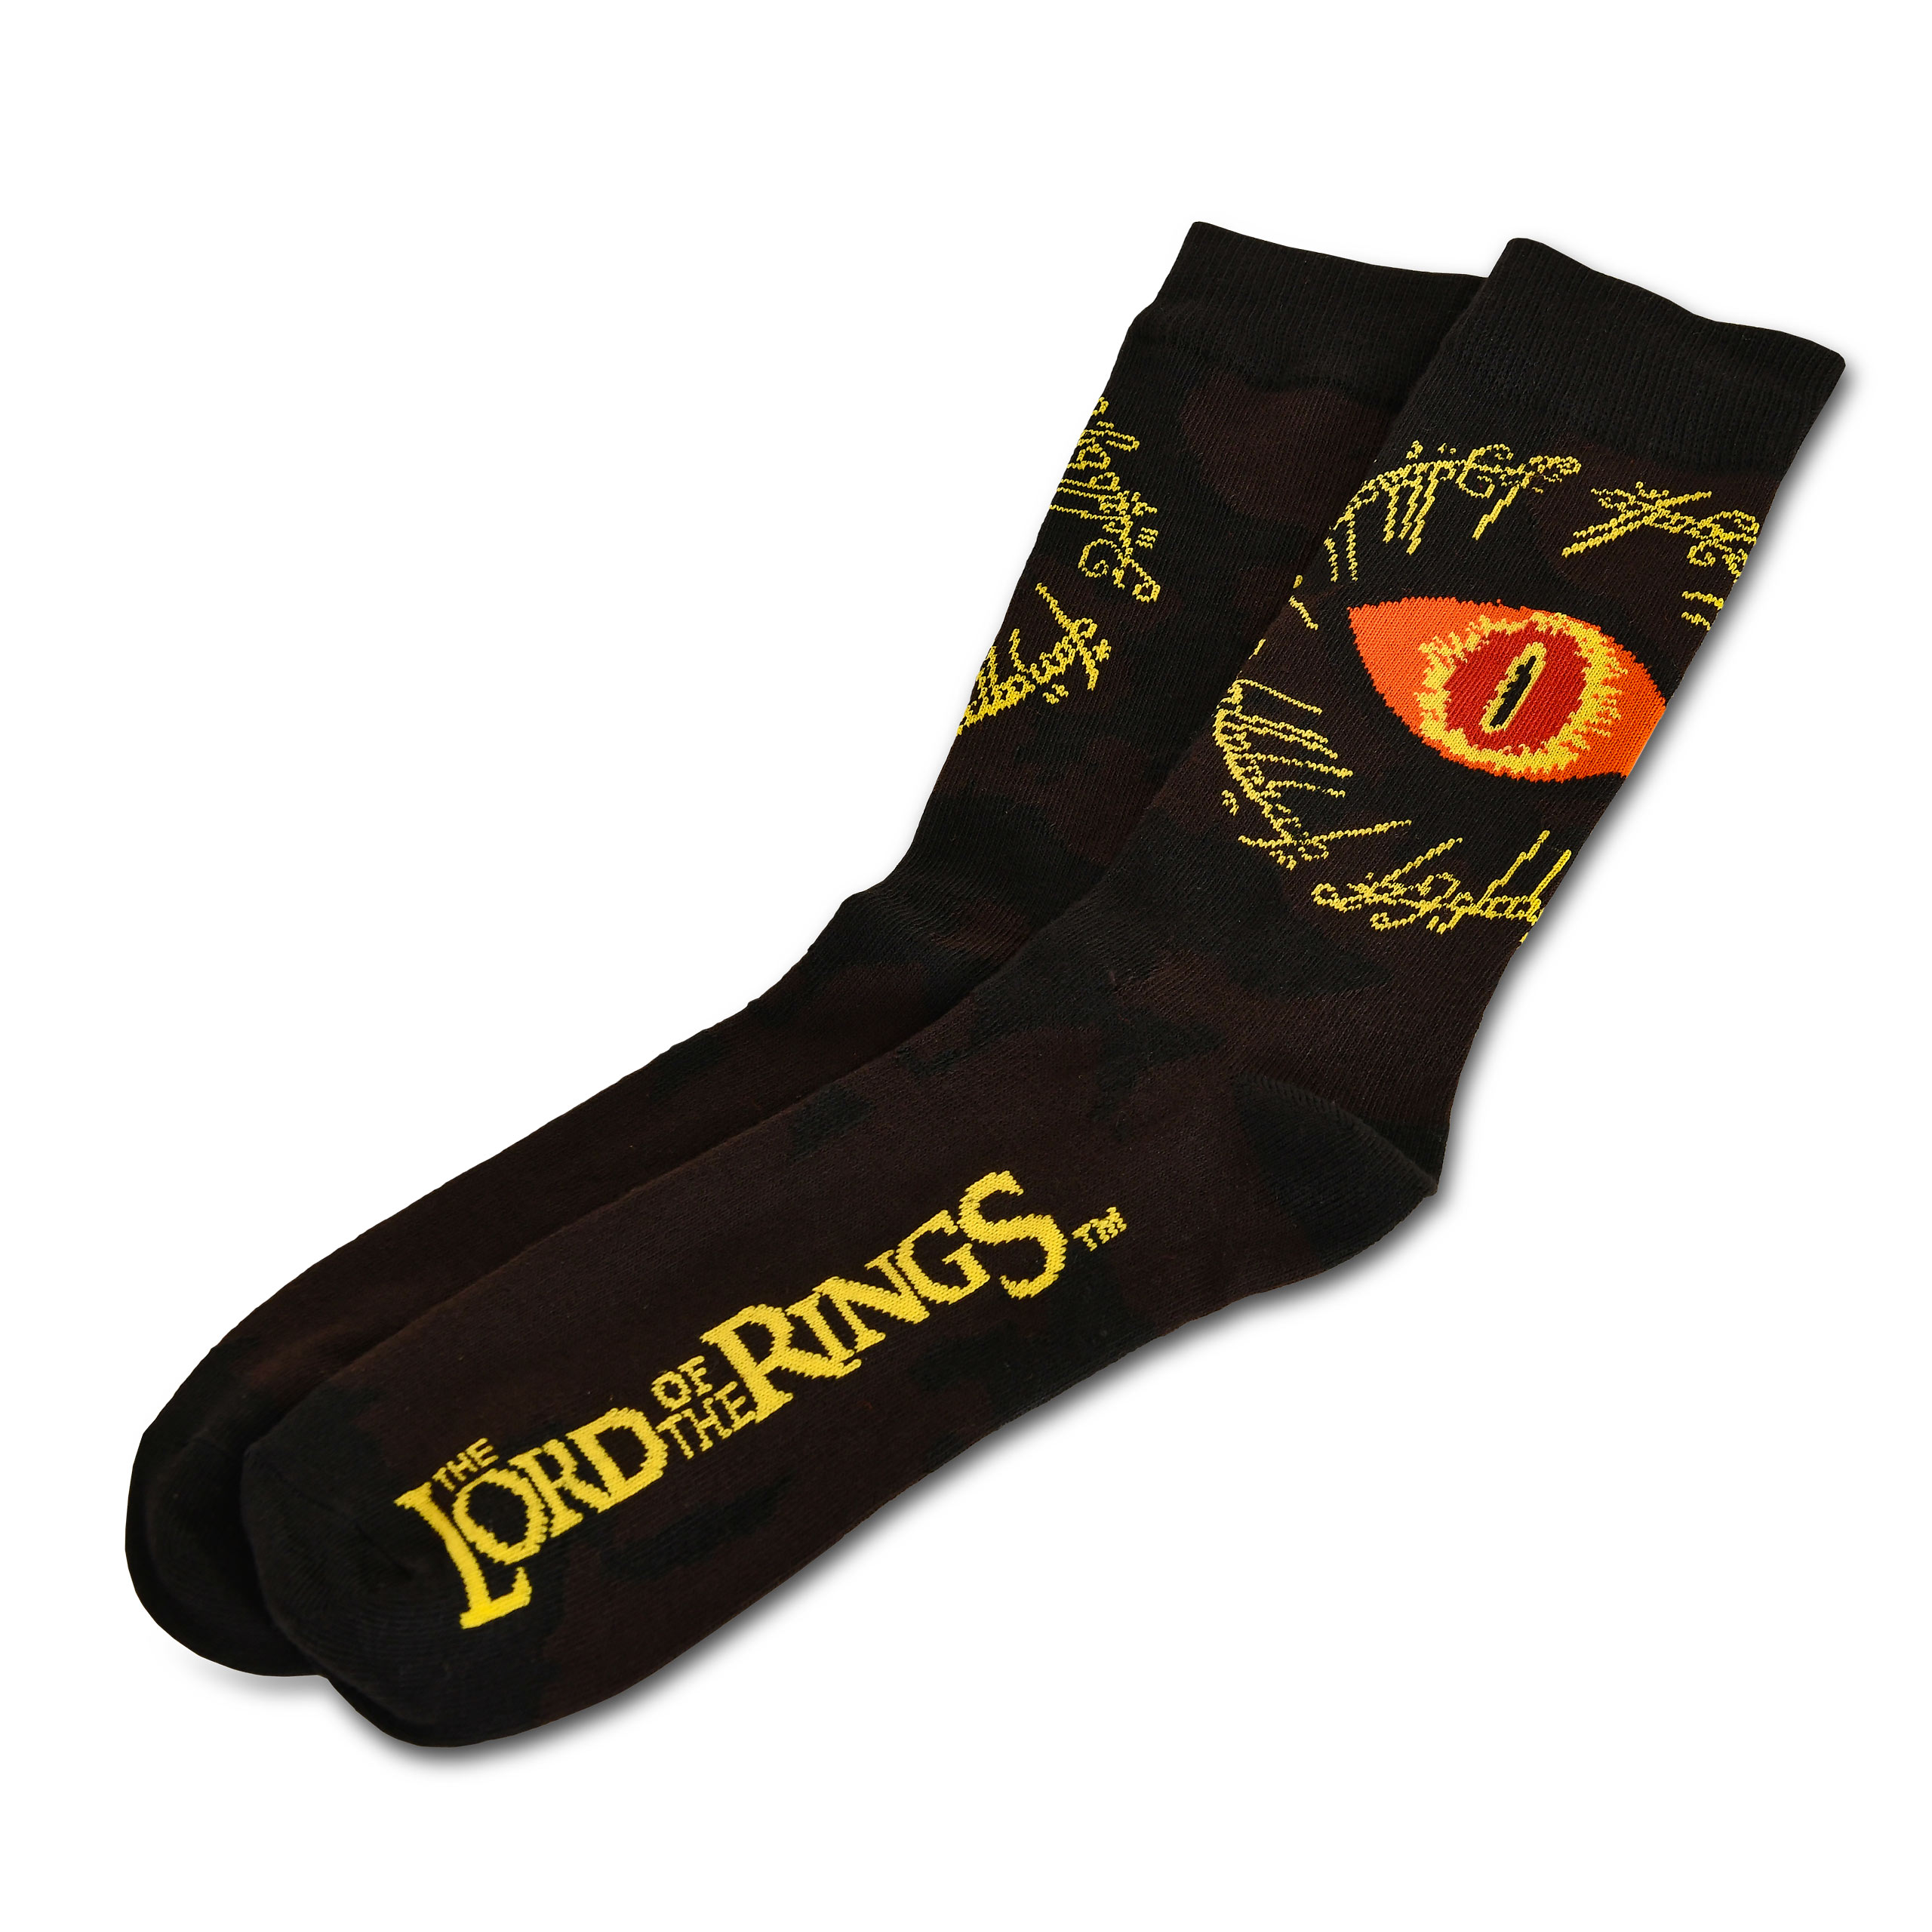 Lord of the Rings - Eye of Sauron Socks